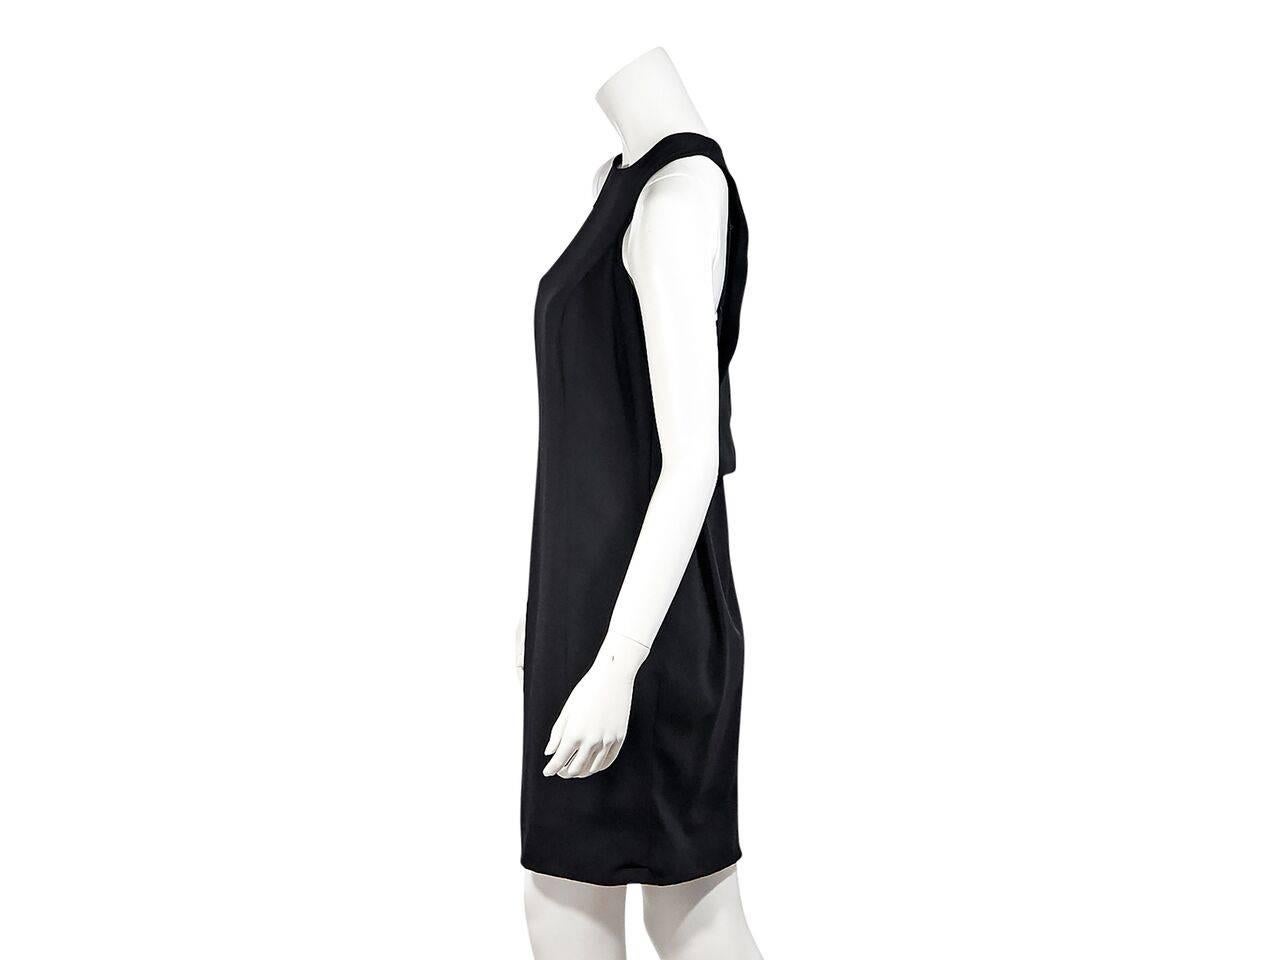 Product details:  Black sheath dress by Alexander Wang.  Jewelneck.  Sleeveless.  Concealed side zip closure.  Draped tulip crossover back.  
Condition: Pre-owned. Very good.
Est. Retail $ 825.00